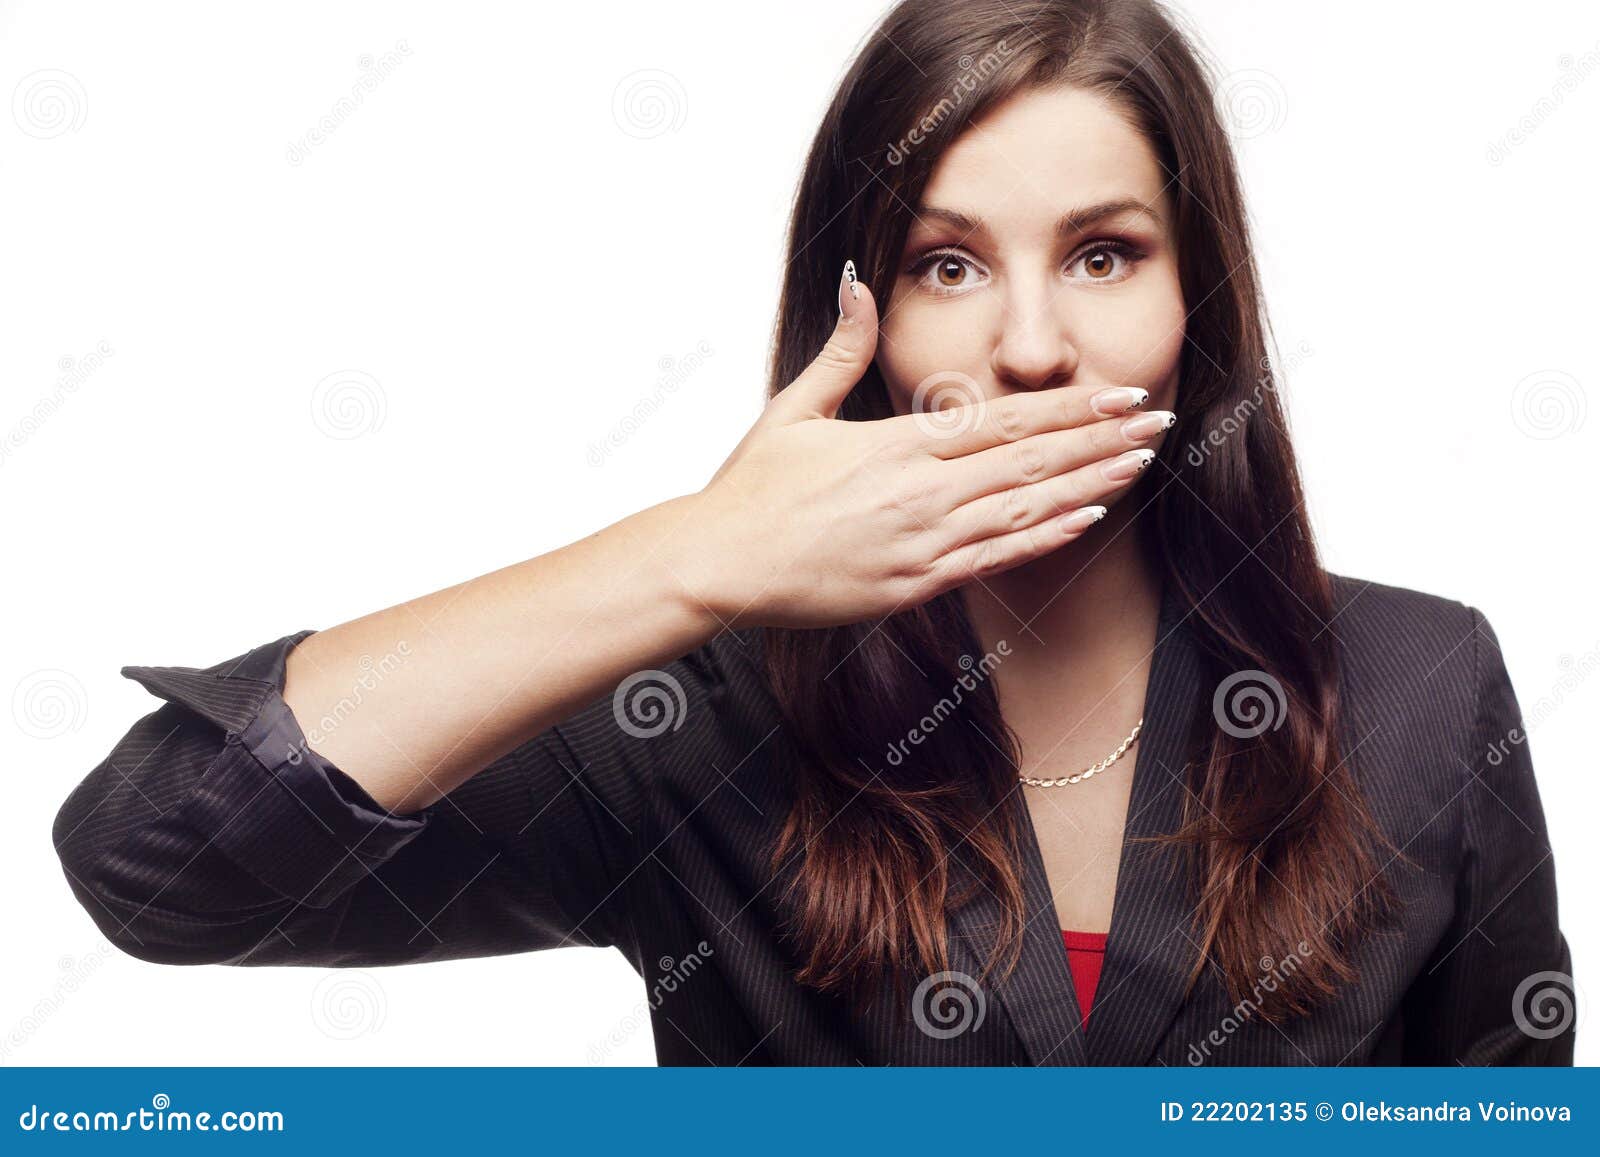 270+ Woman Closed Mouth Smile Stock Illustrations, Royalty-Free